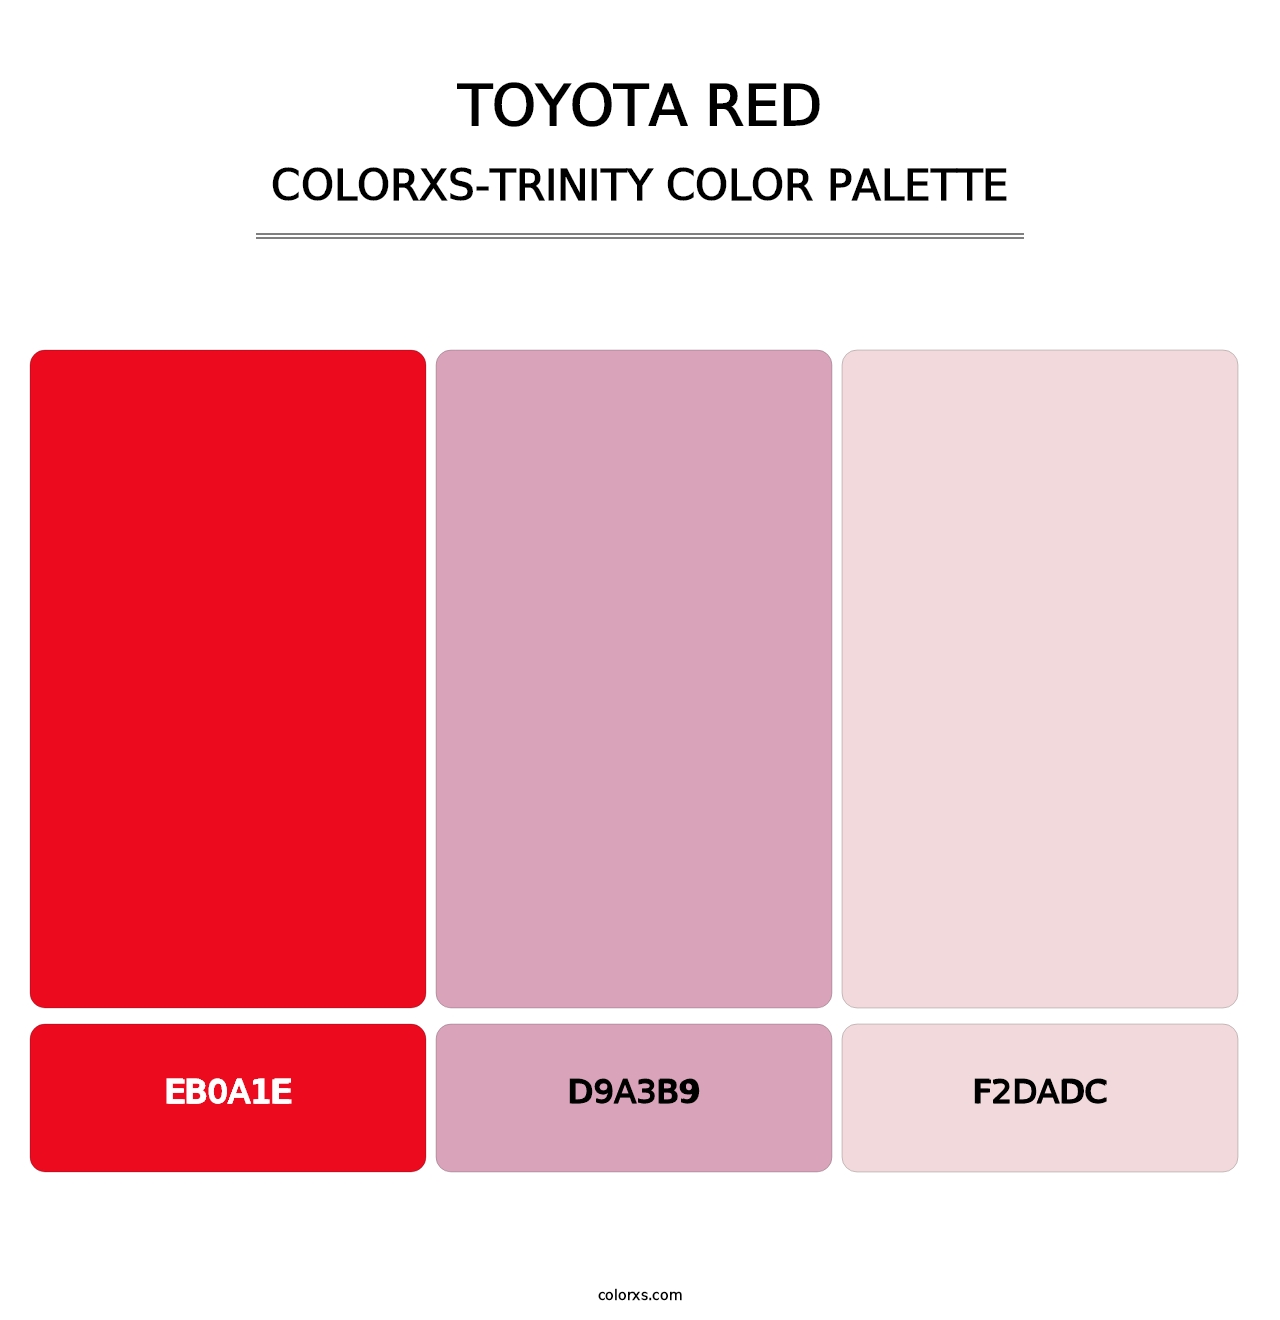 Toyota Red - Colorxs Trinity Palette